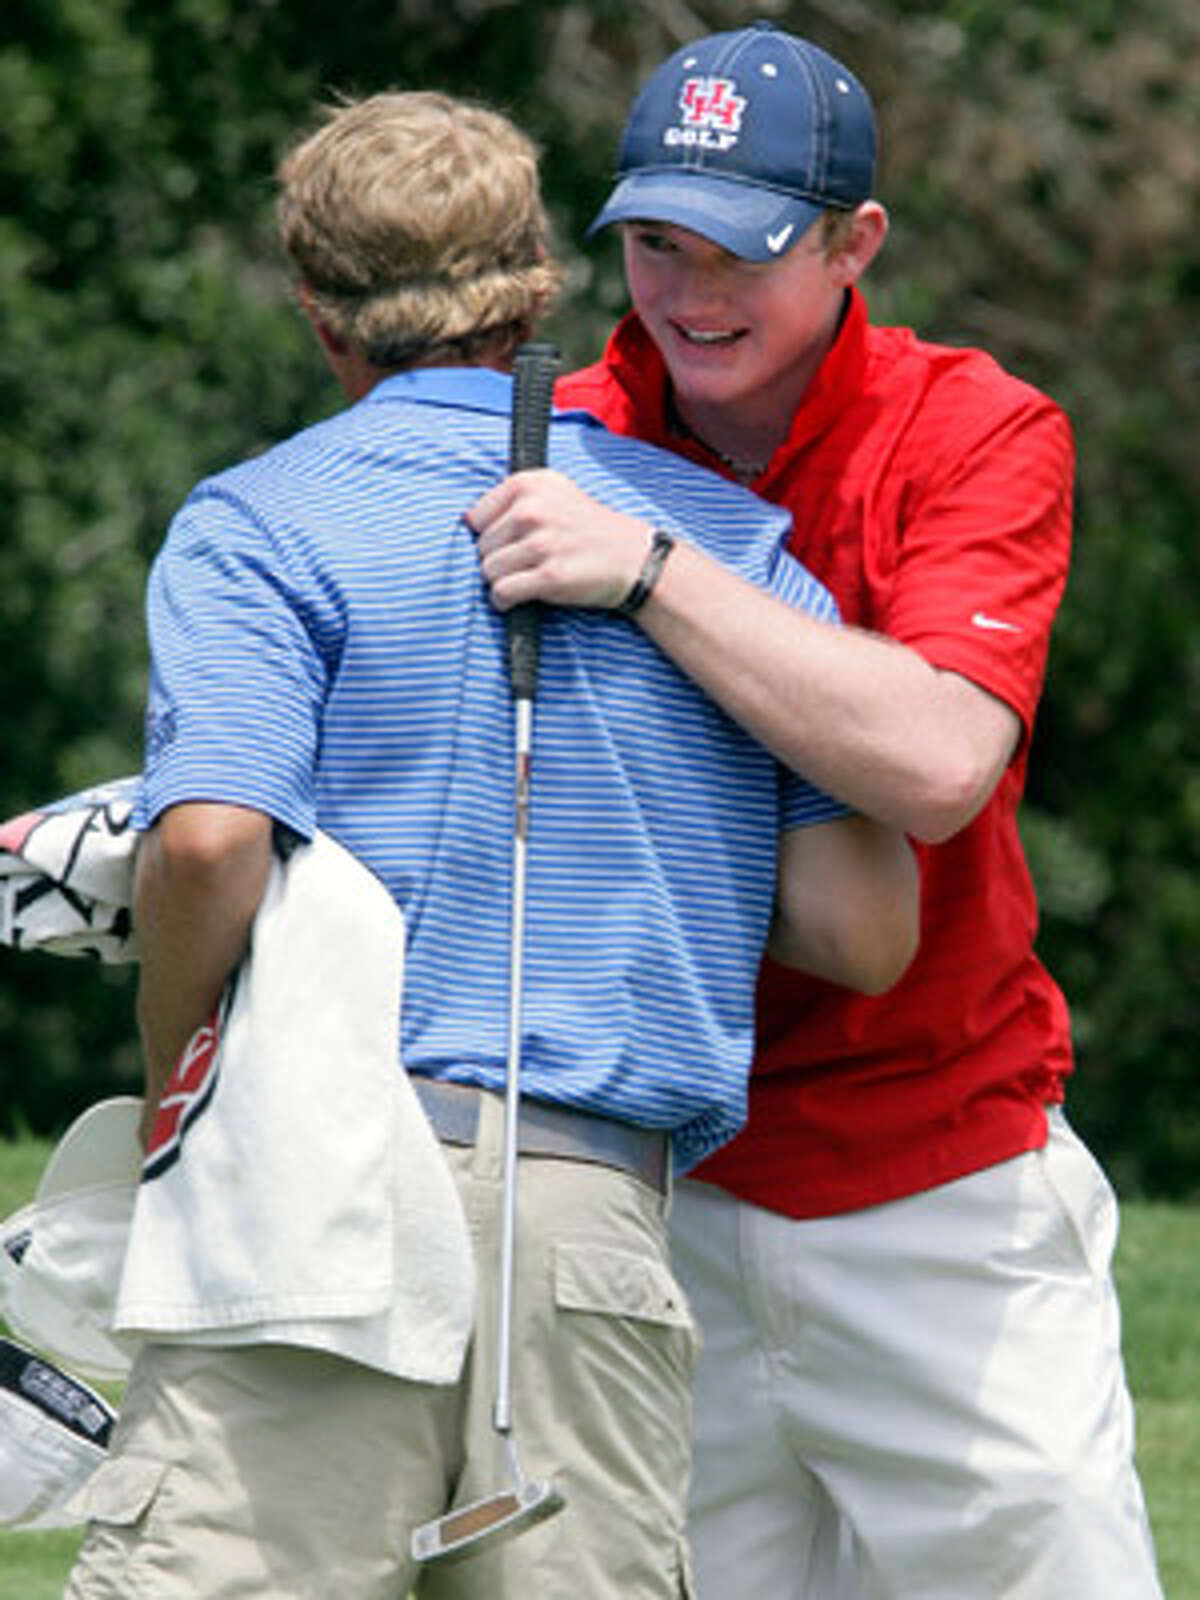 Friends Curtis Reed (right) and Andrew Carreon, two top area junior players, hug during the Valero Texas Open Junior Shootout second round on July 14. Reed will play for the University of Houston, Carreon for Notre Dame.